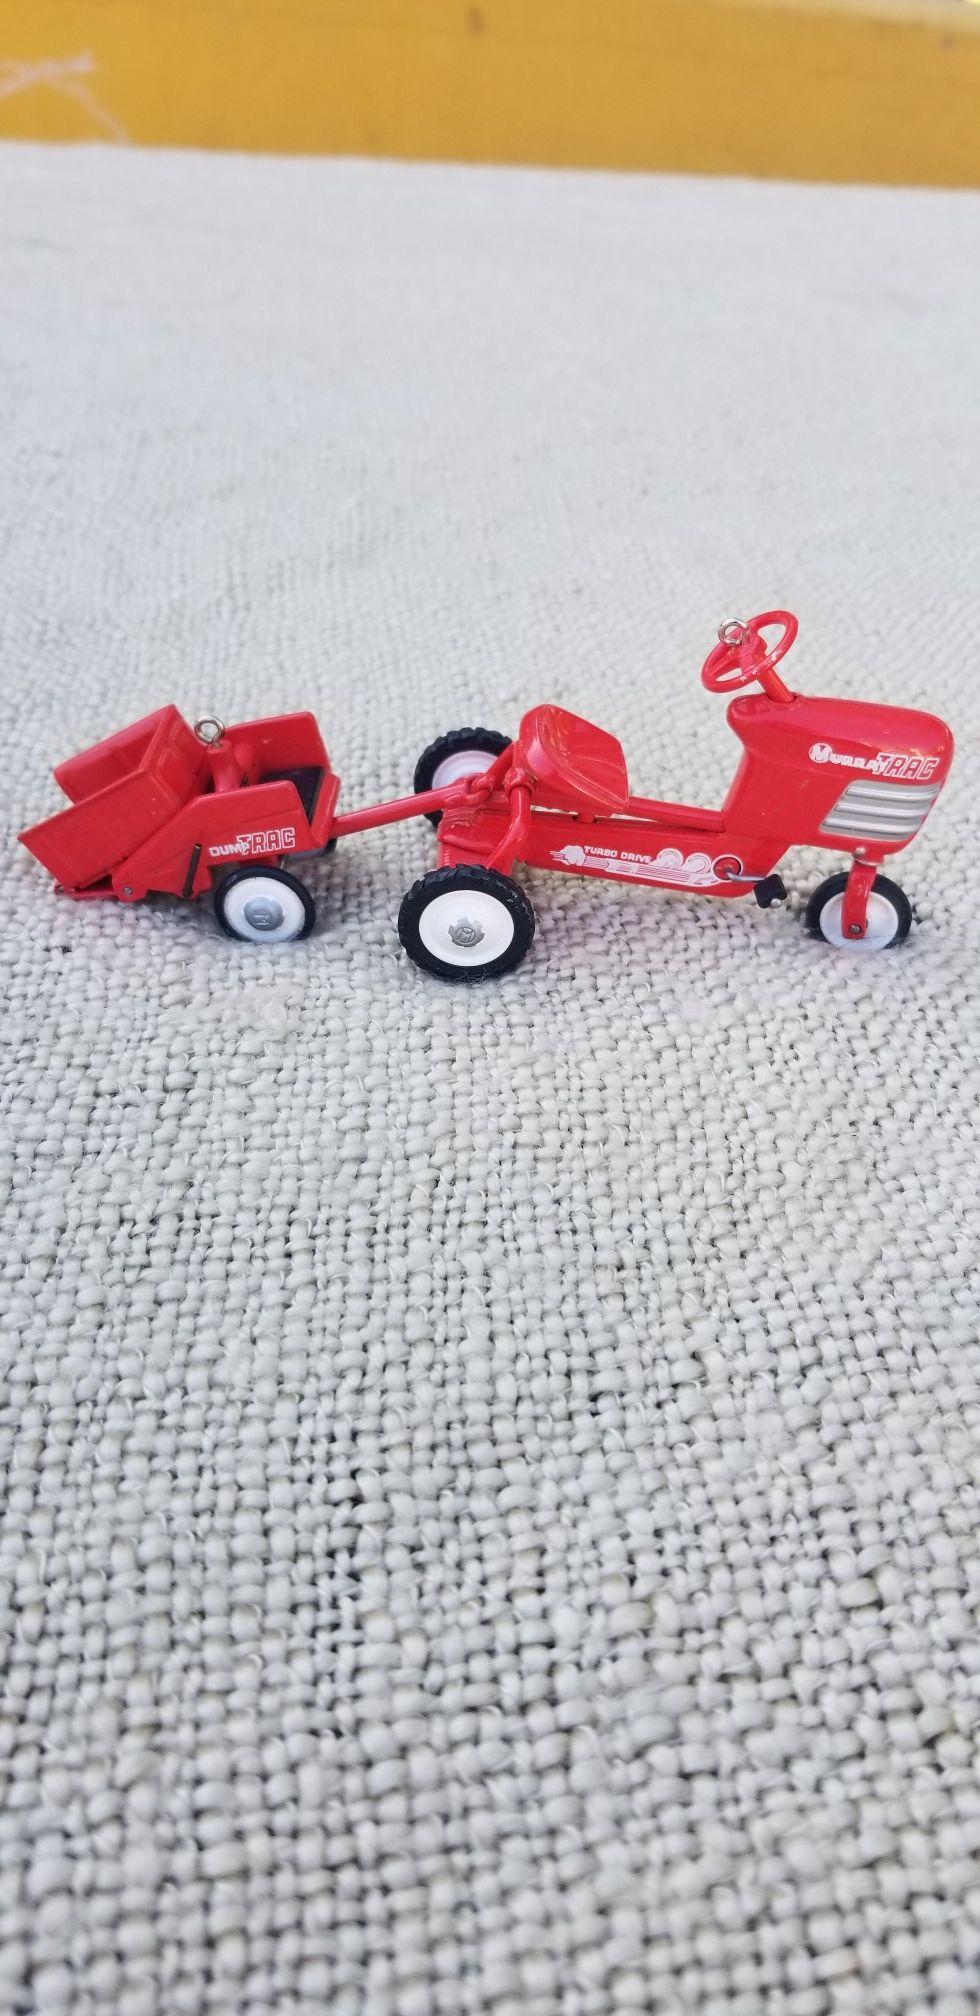 Murray tractor ornament